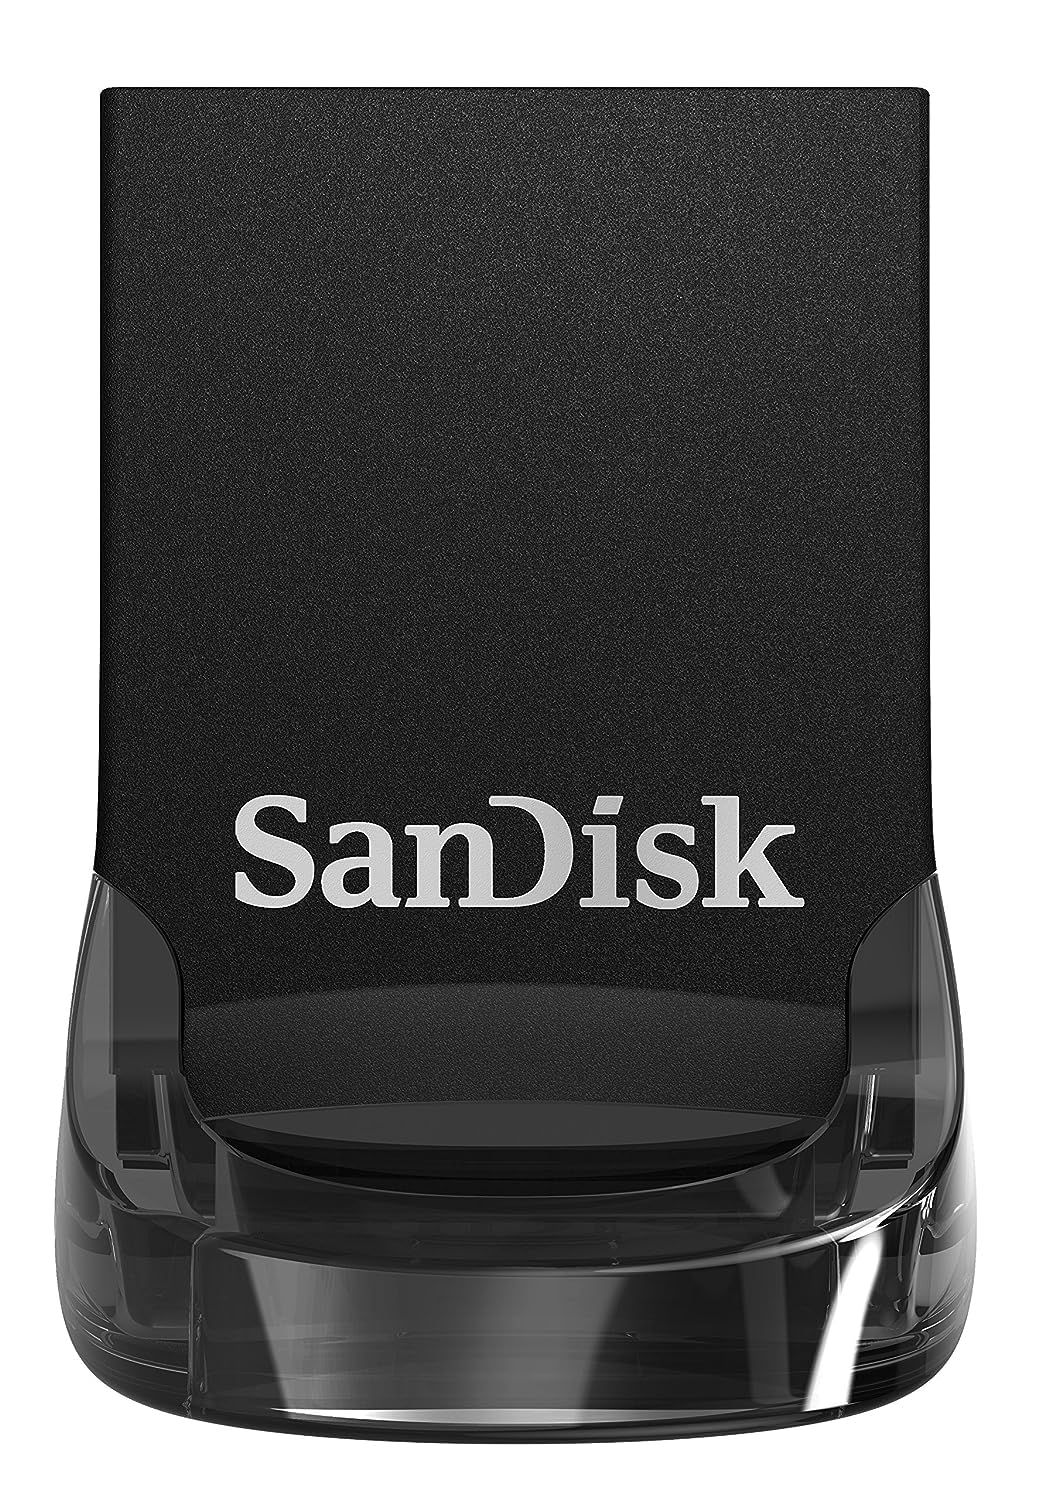 256GB SanDisk Ultra Fit USB 3.1 Flash Drive (Up to 130 MB/s) $11.79 + Free Shipping w/ Prime or on $35+